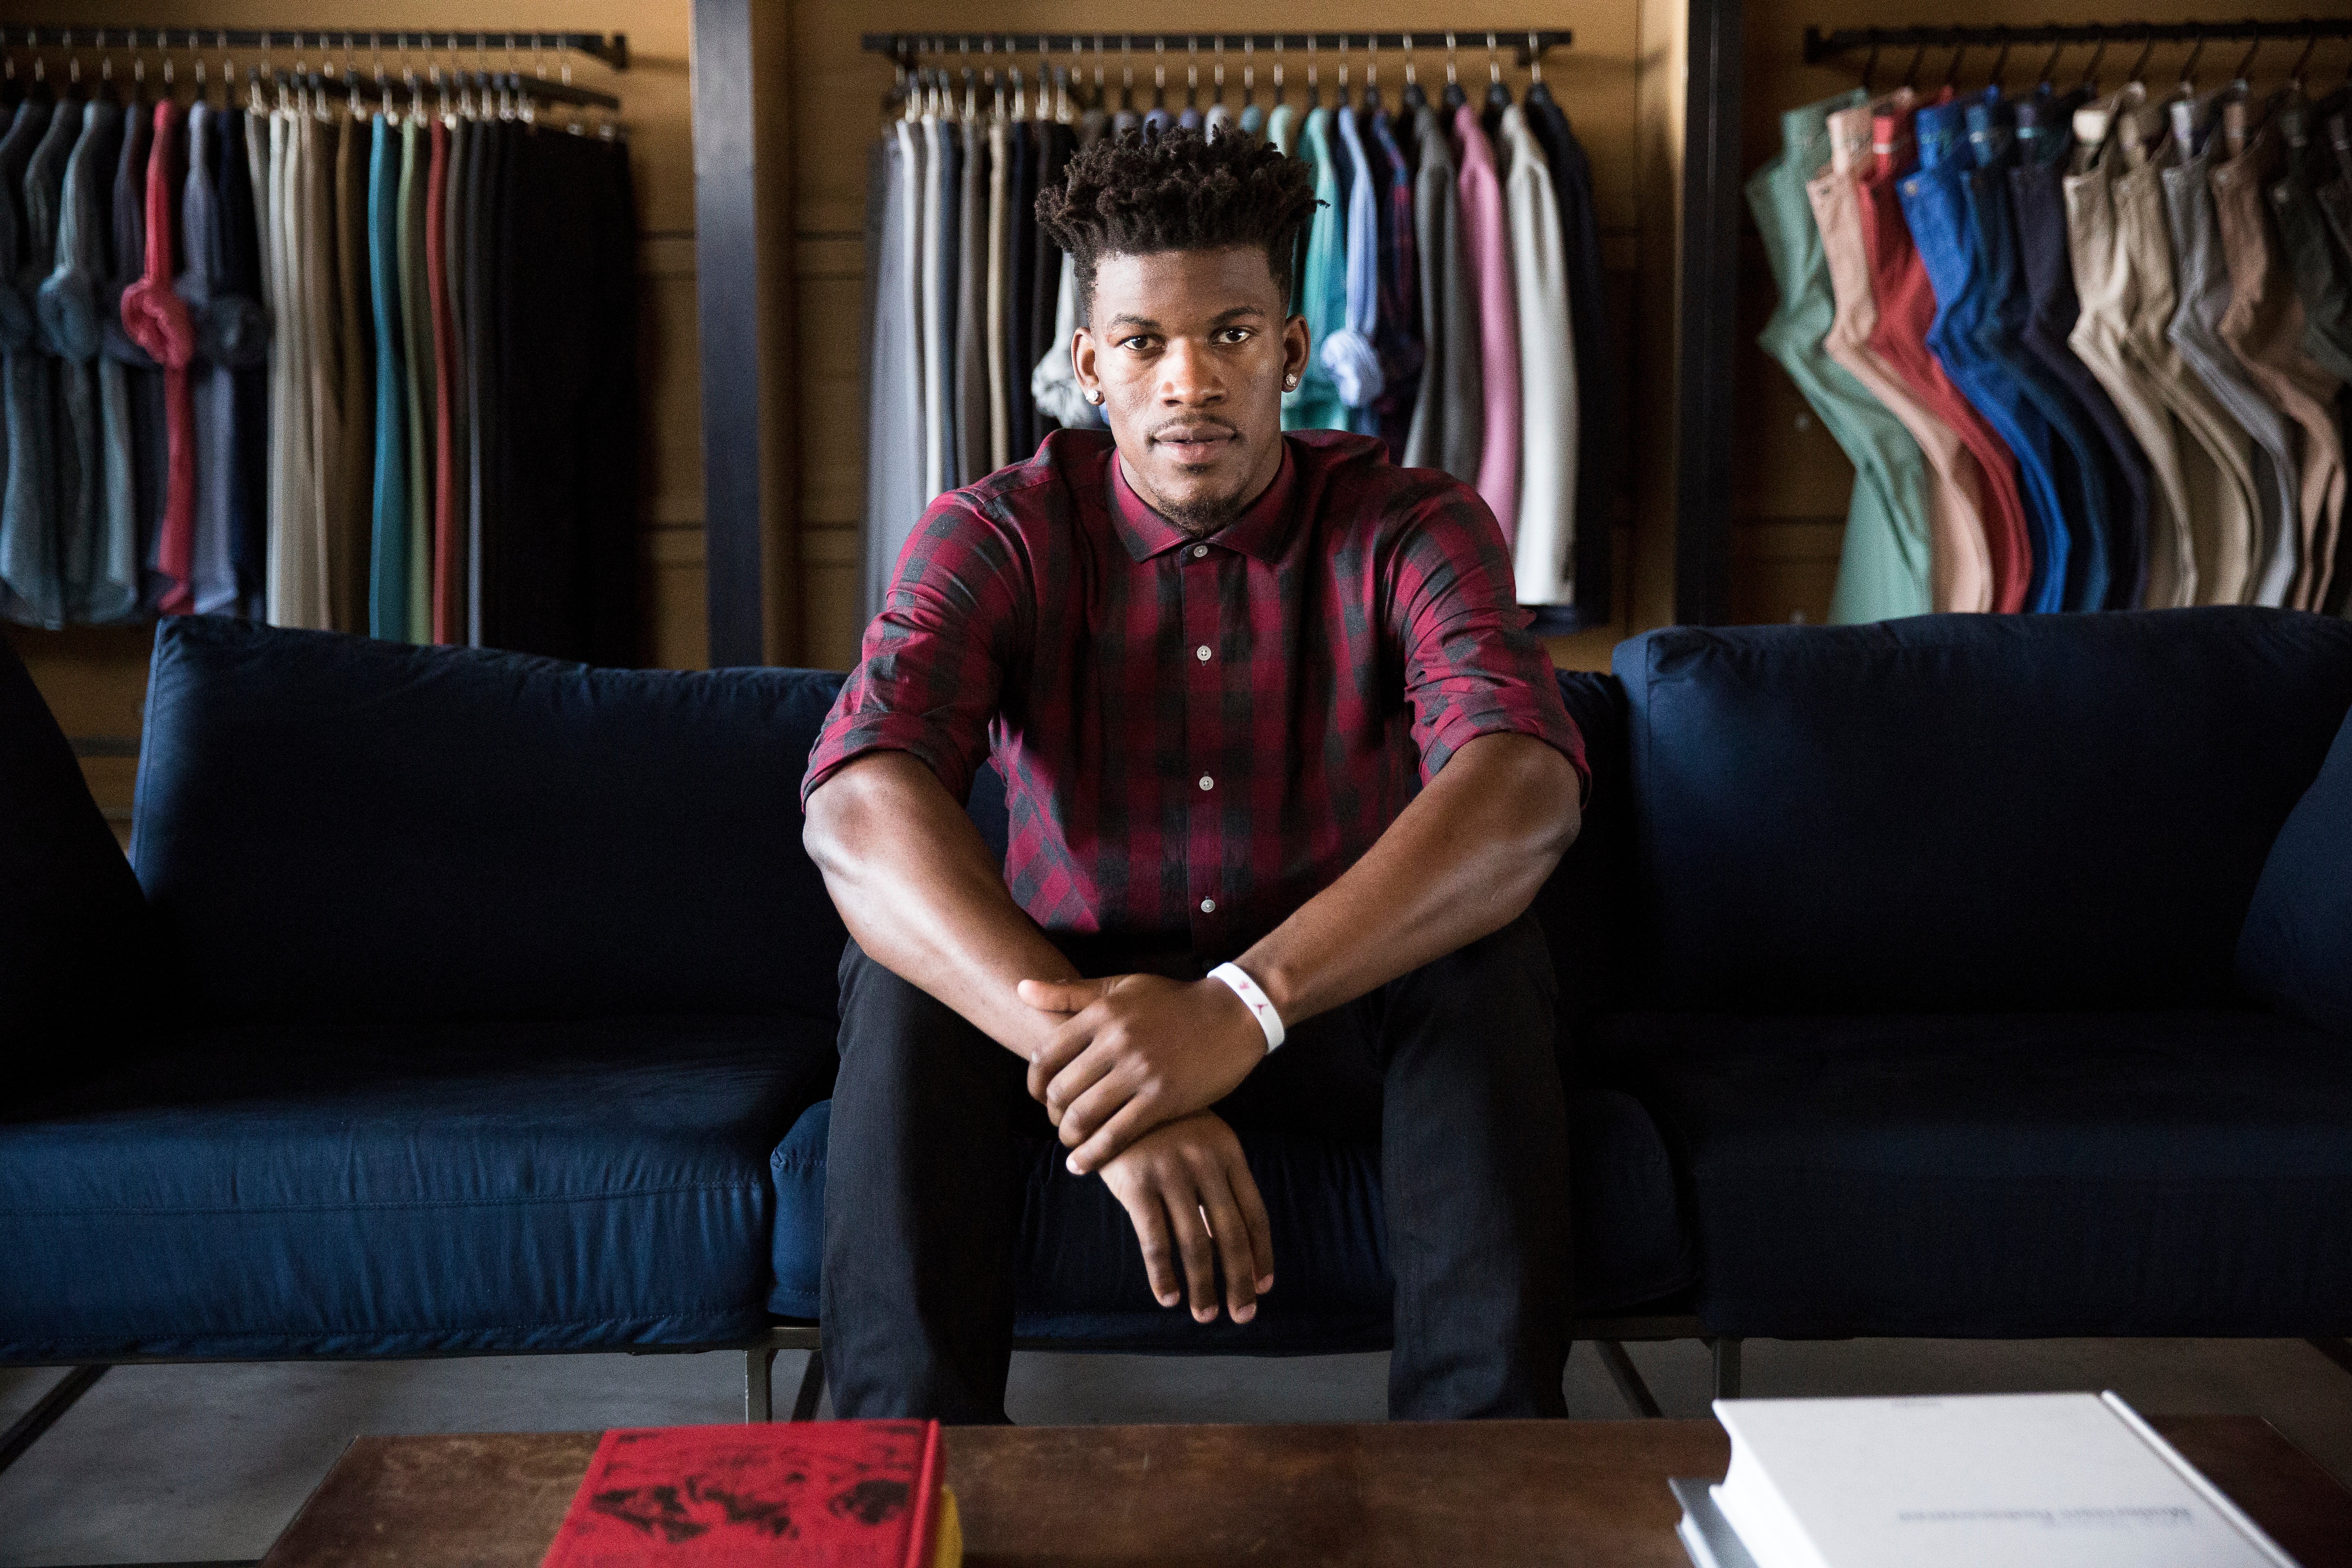 NBA Star Jimmy Butler Dishes on Starring in Bonobos' First-Ever Fashion Campaign
